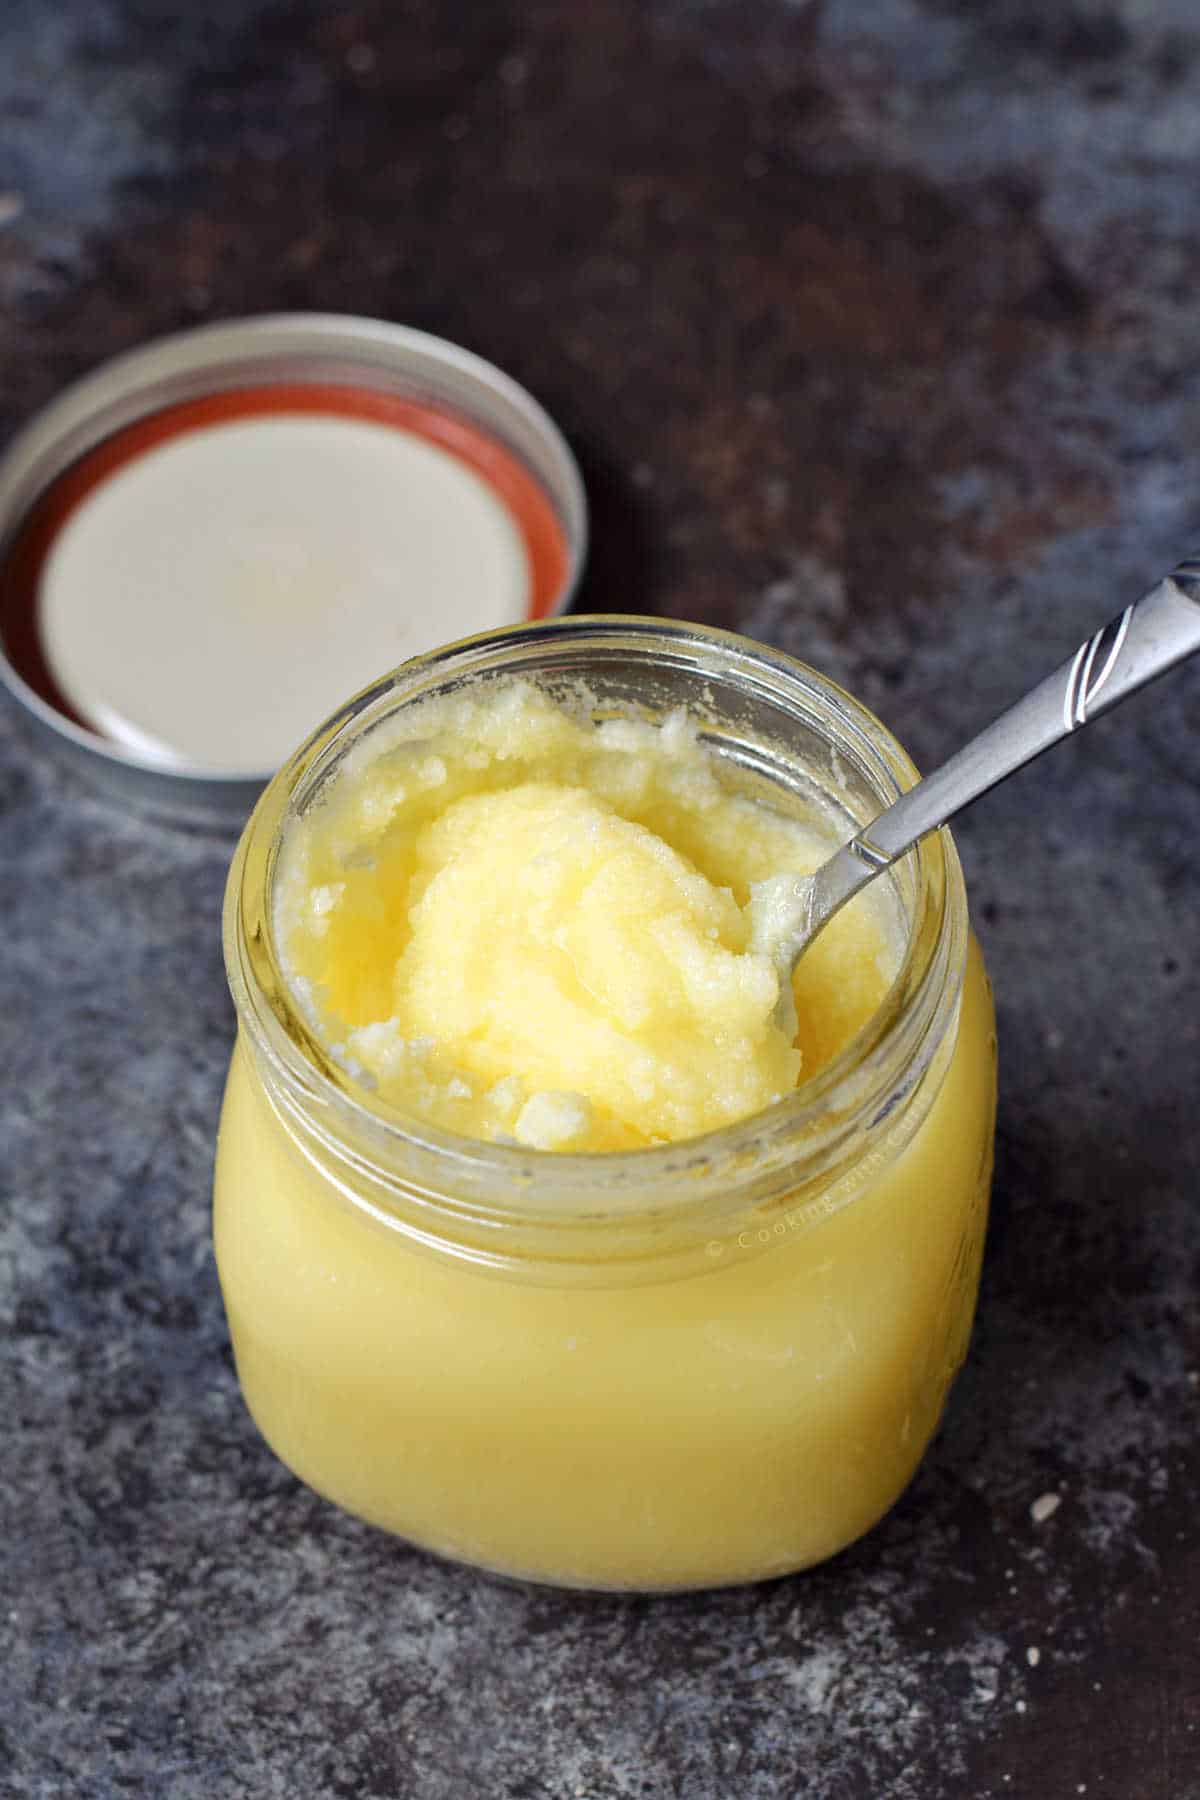 Clarified butter in a small jar with a spoon.